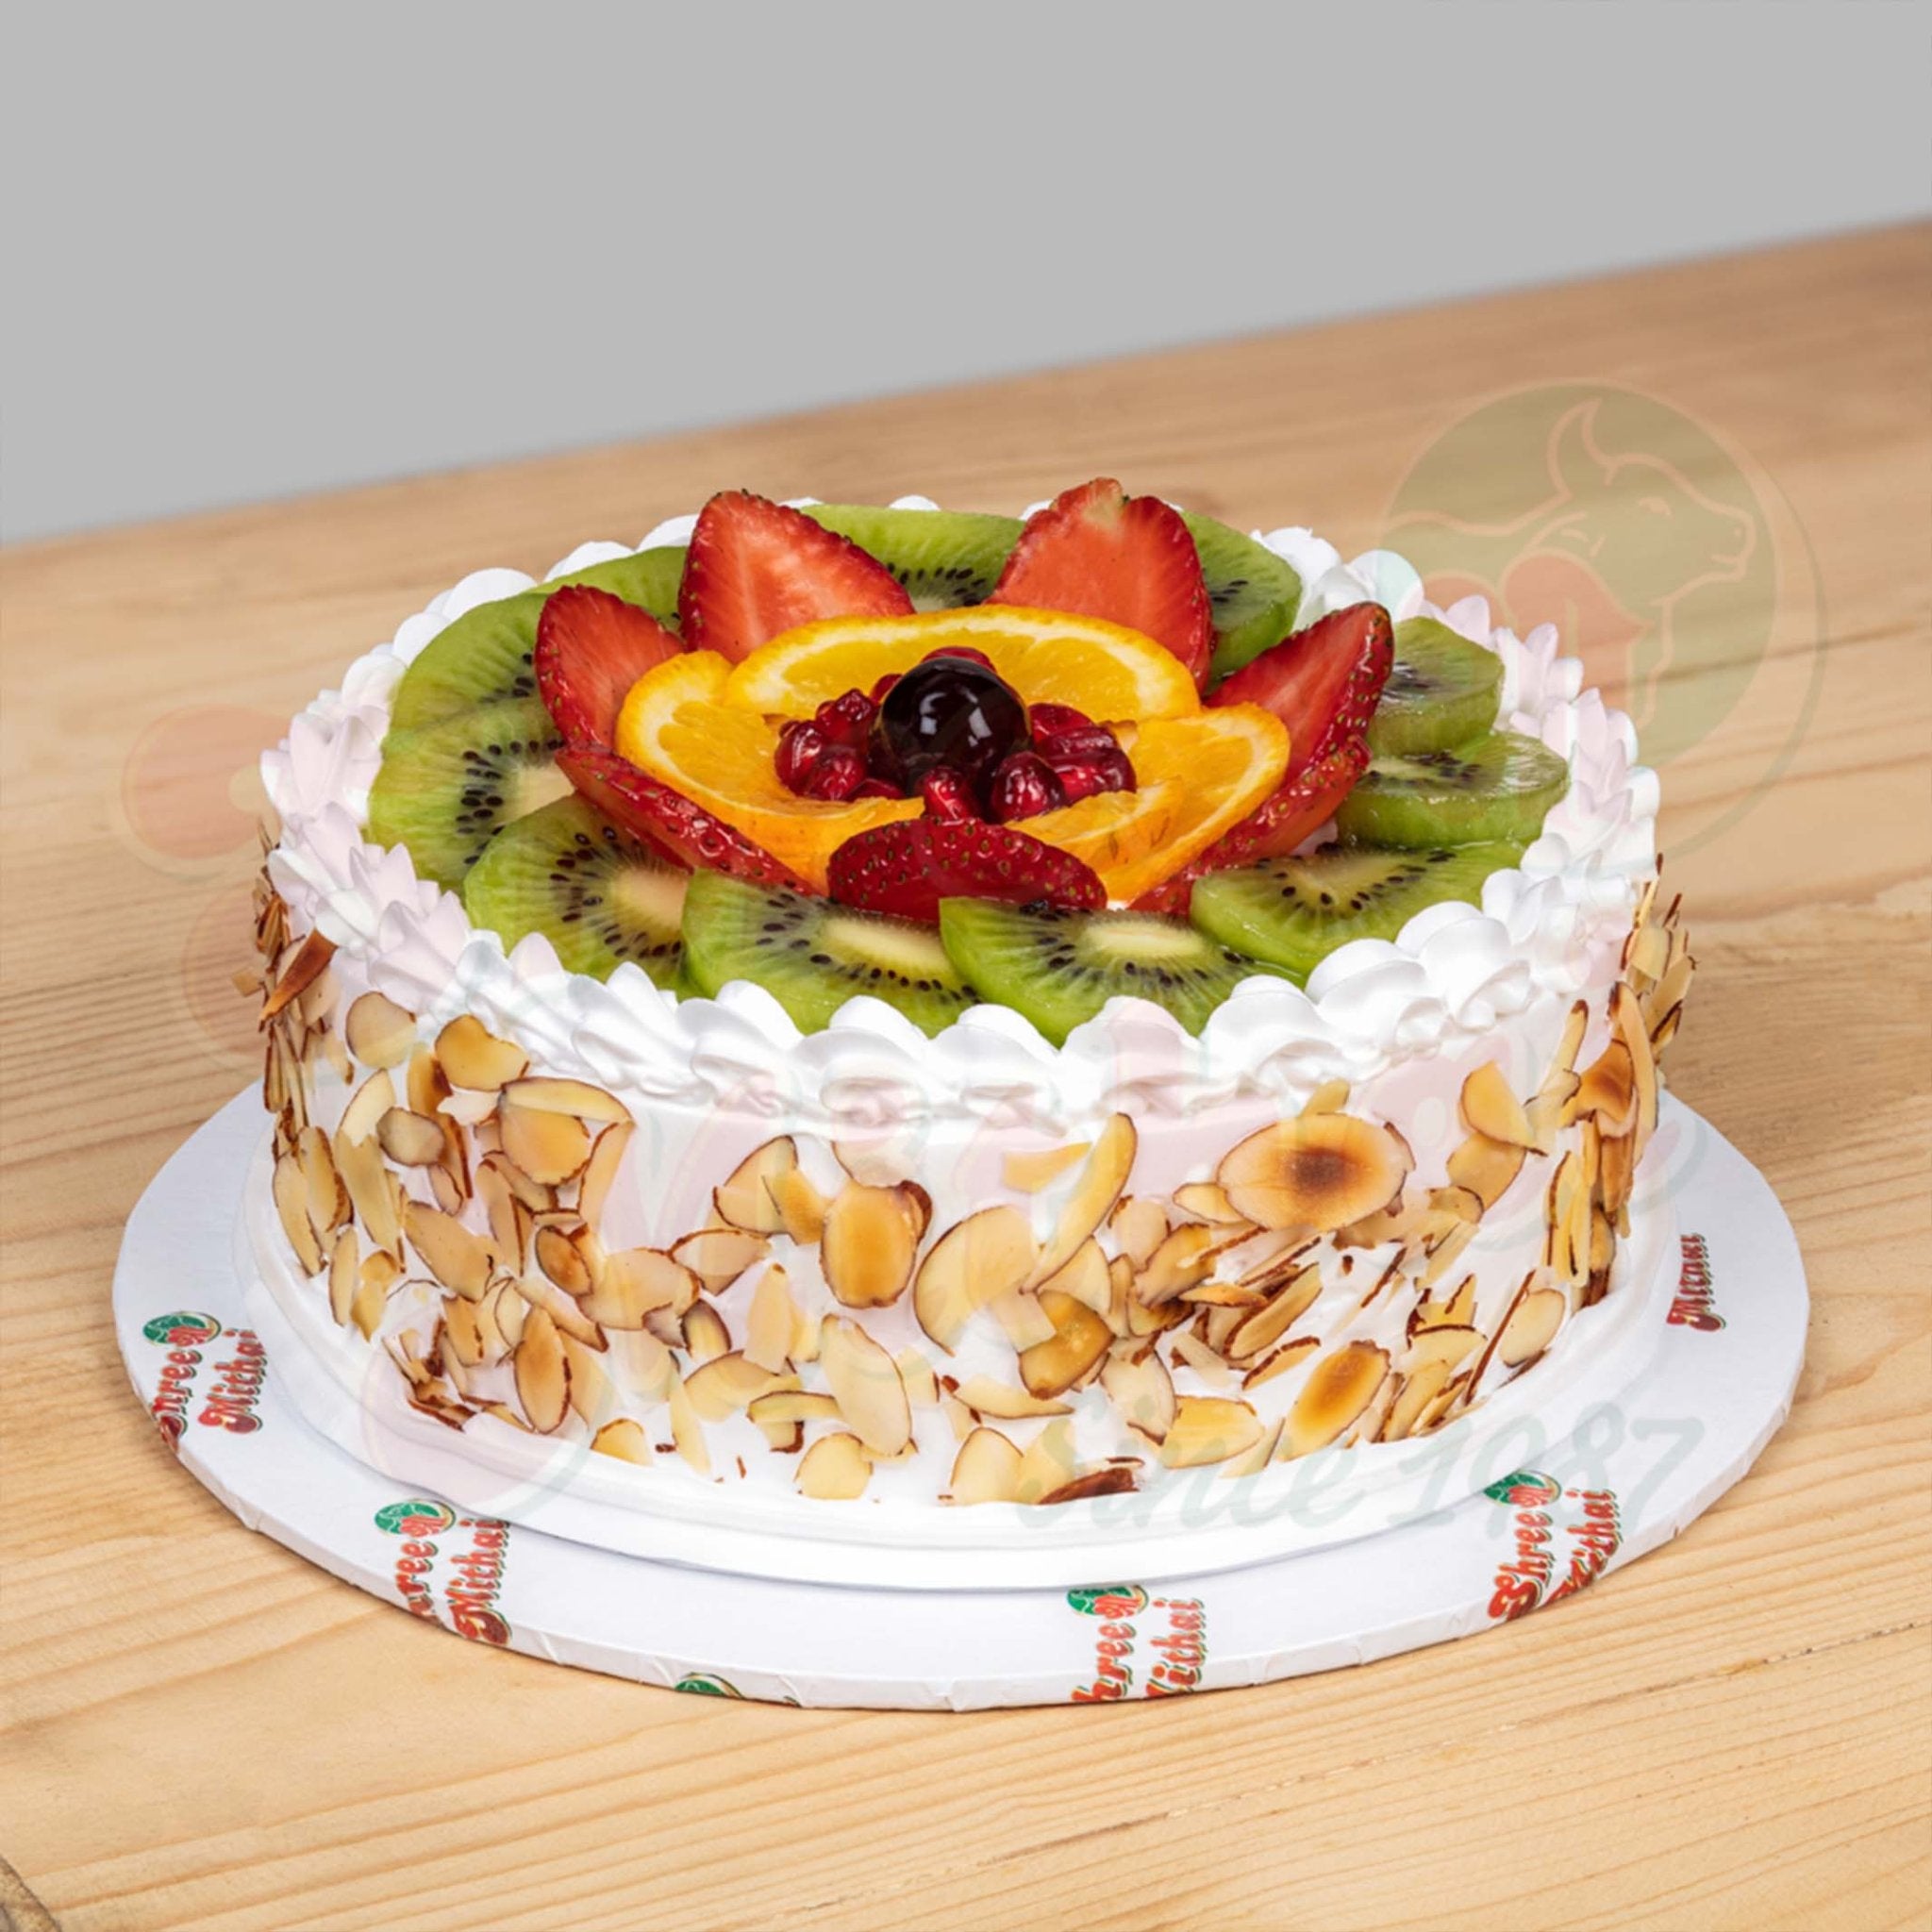 Vanilla Sponge Cake with Whipped Cream and Fruits - Shweta in the Kitchen